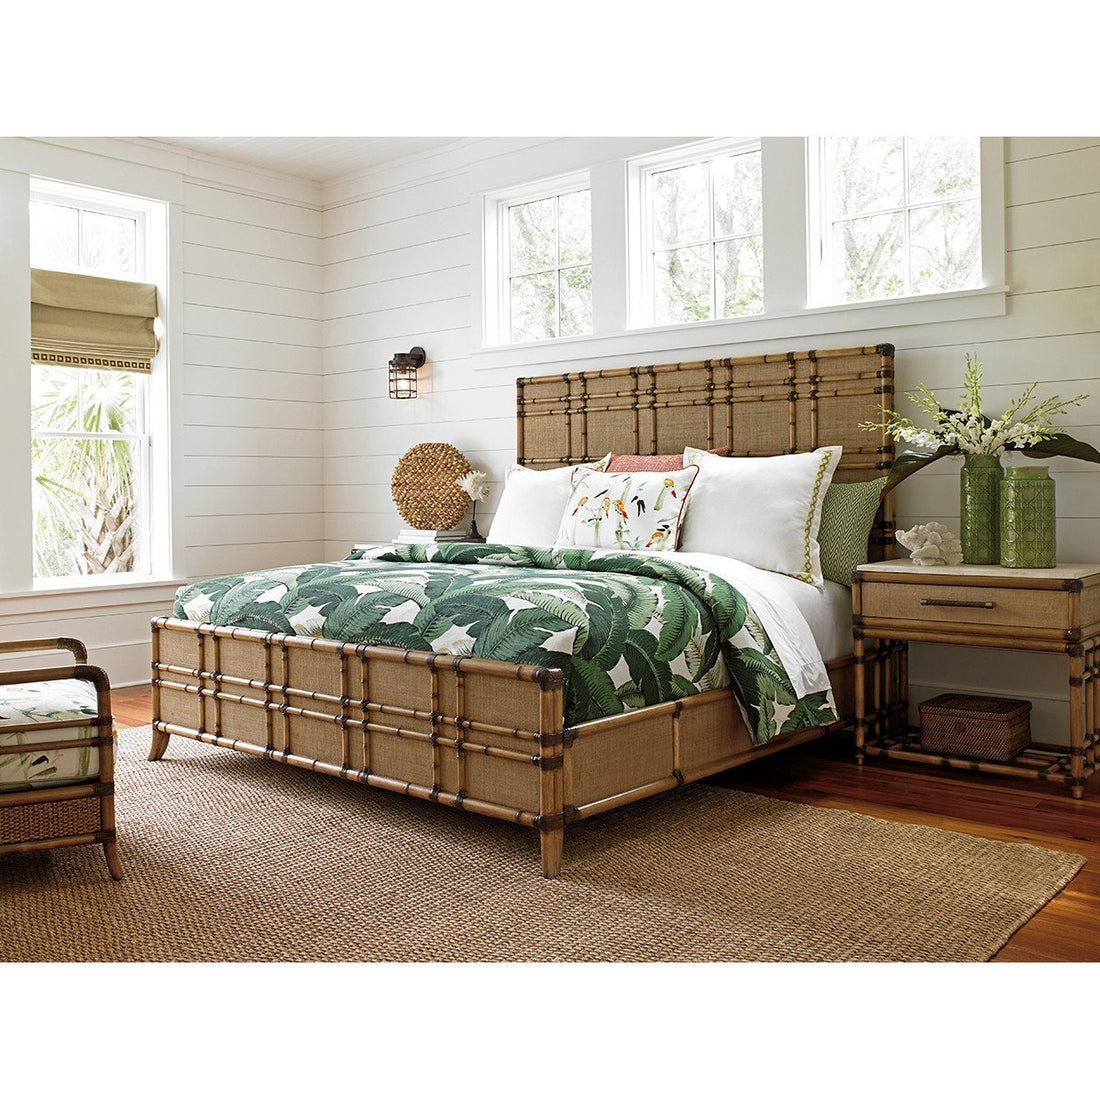 Tommy Bahama Twin Palms Coco Bay Panel Bed